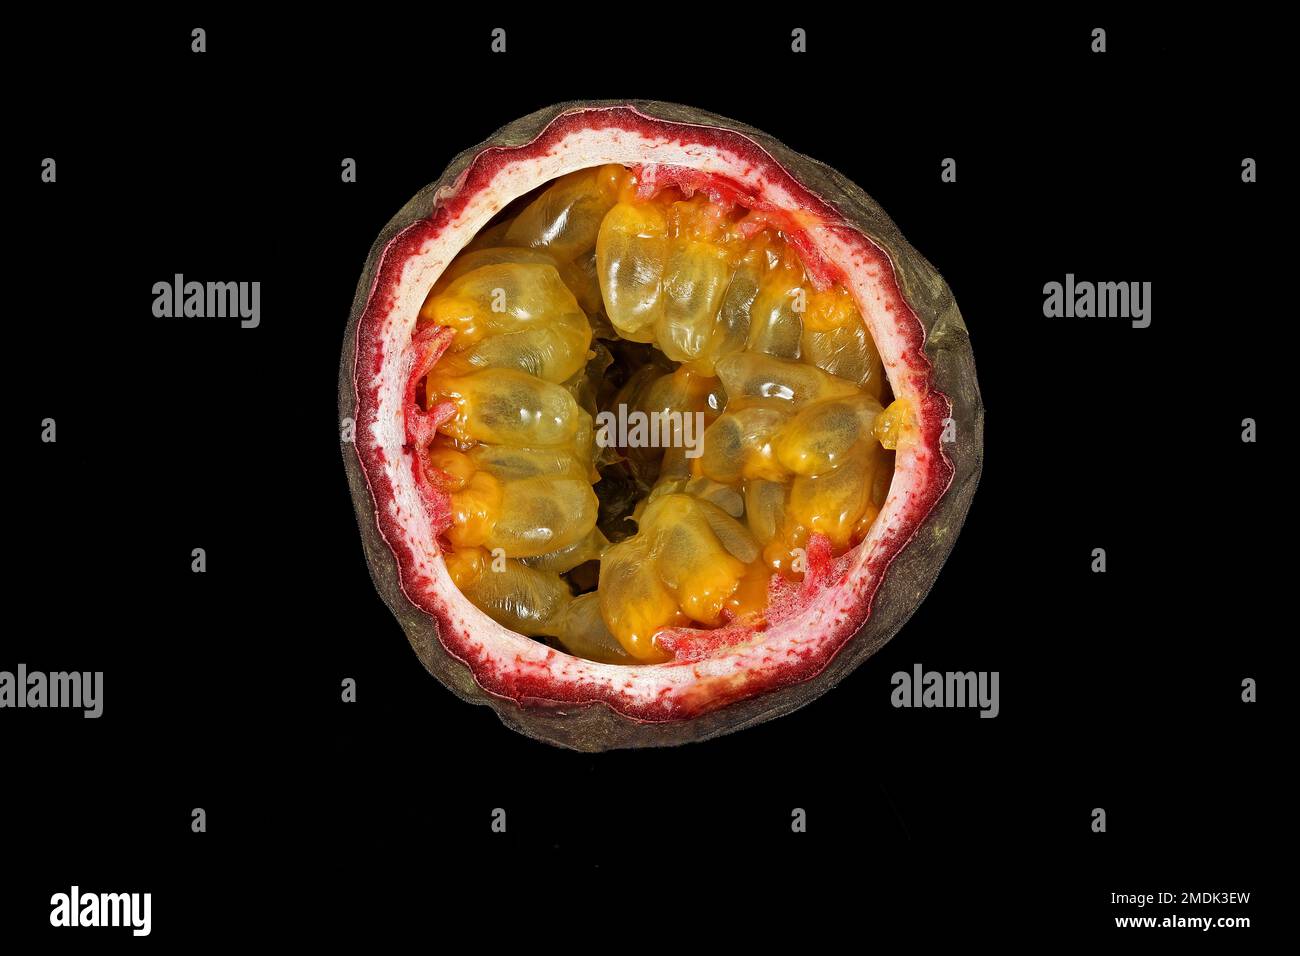 Passiflora edulis, Passion fruit, Passionsfrucht, close up, fruit with seeds Stock Photo